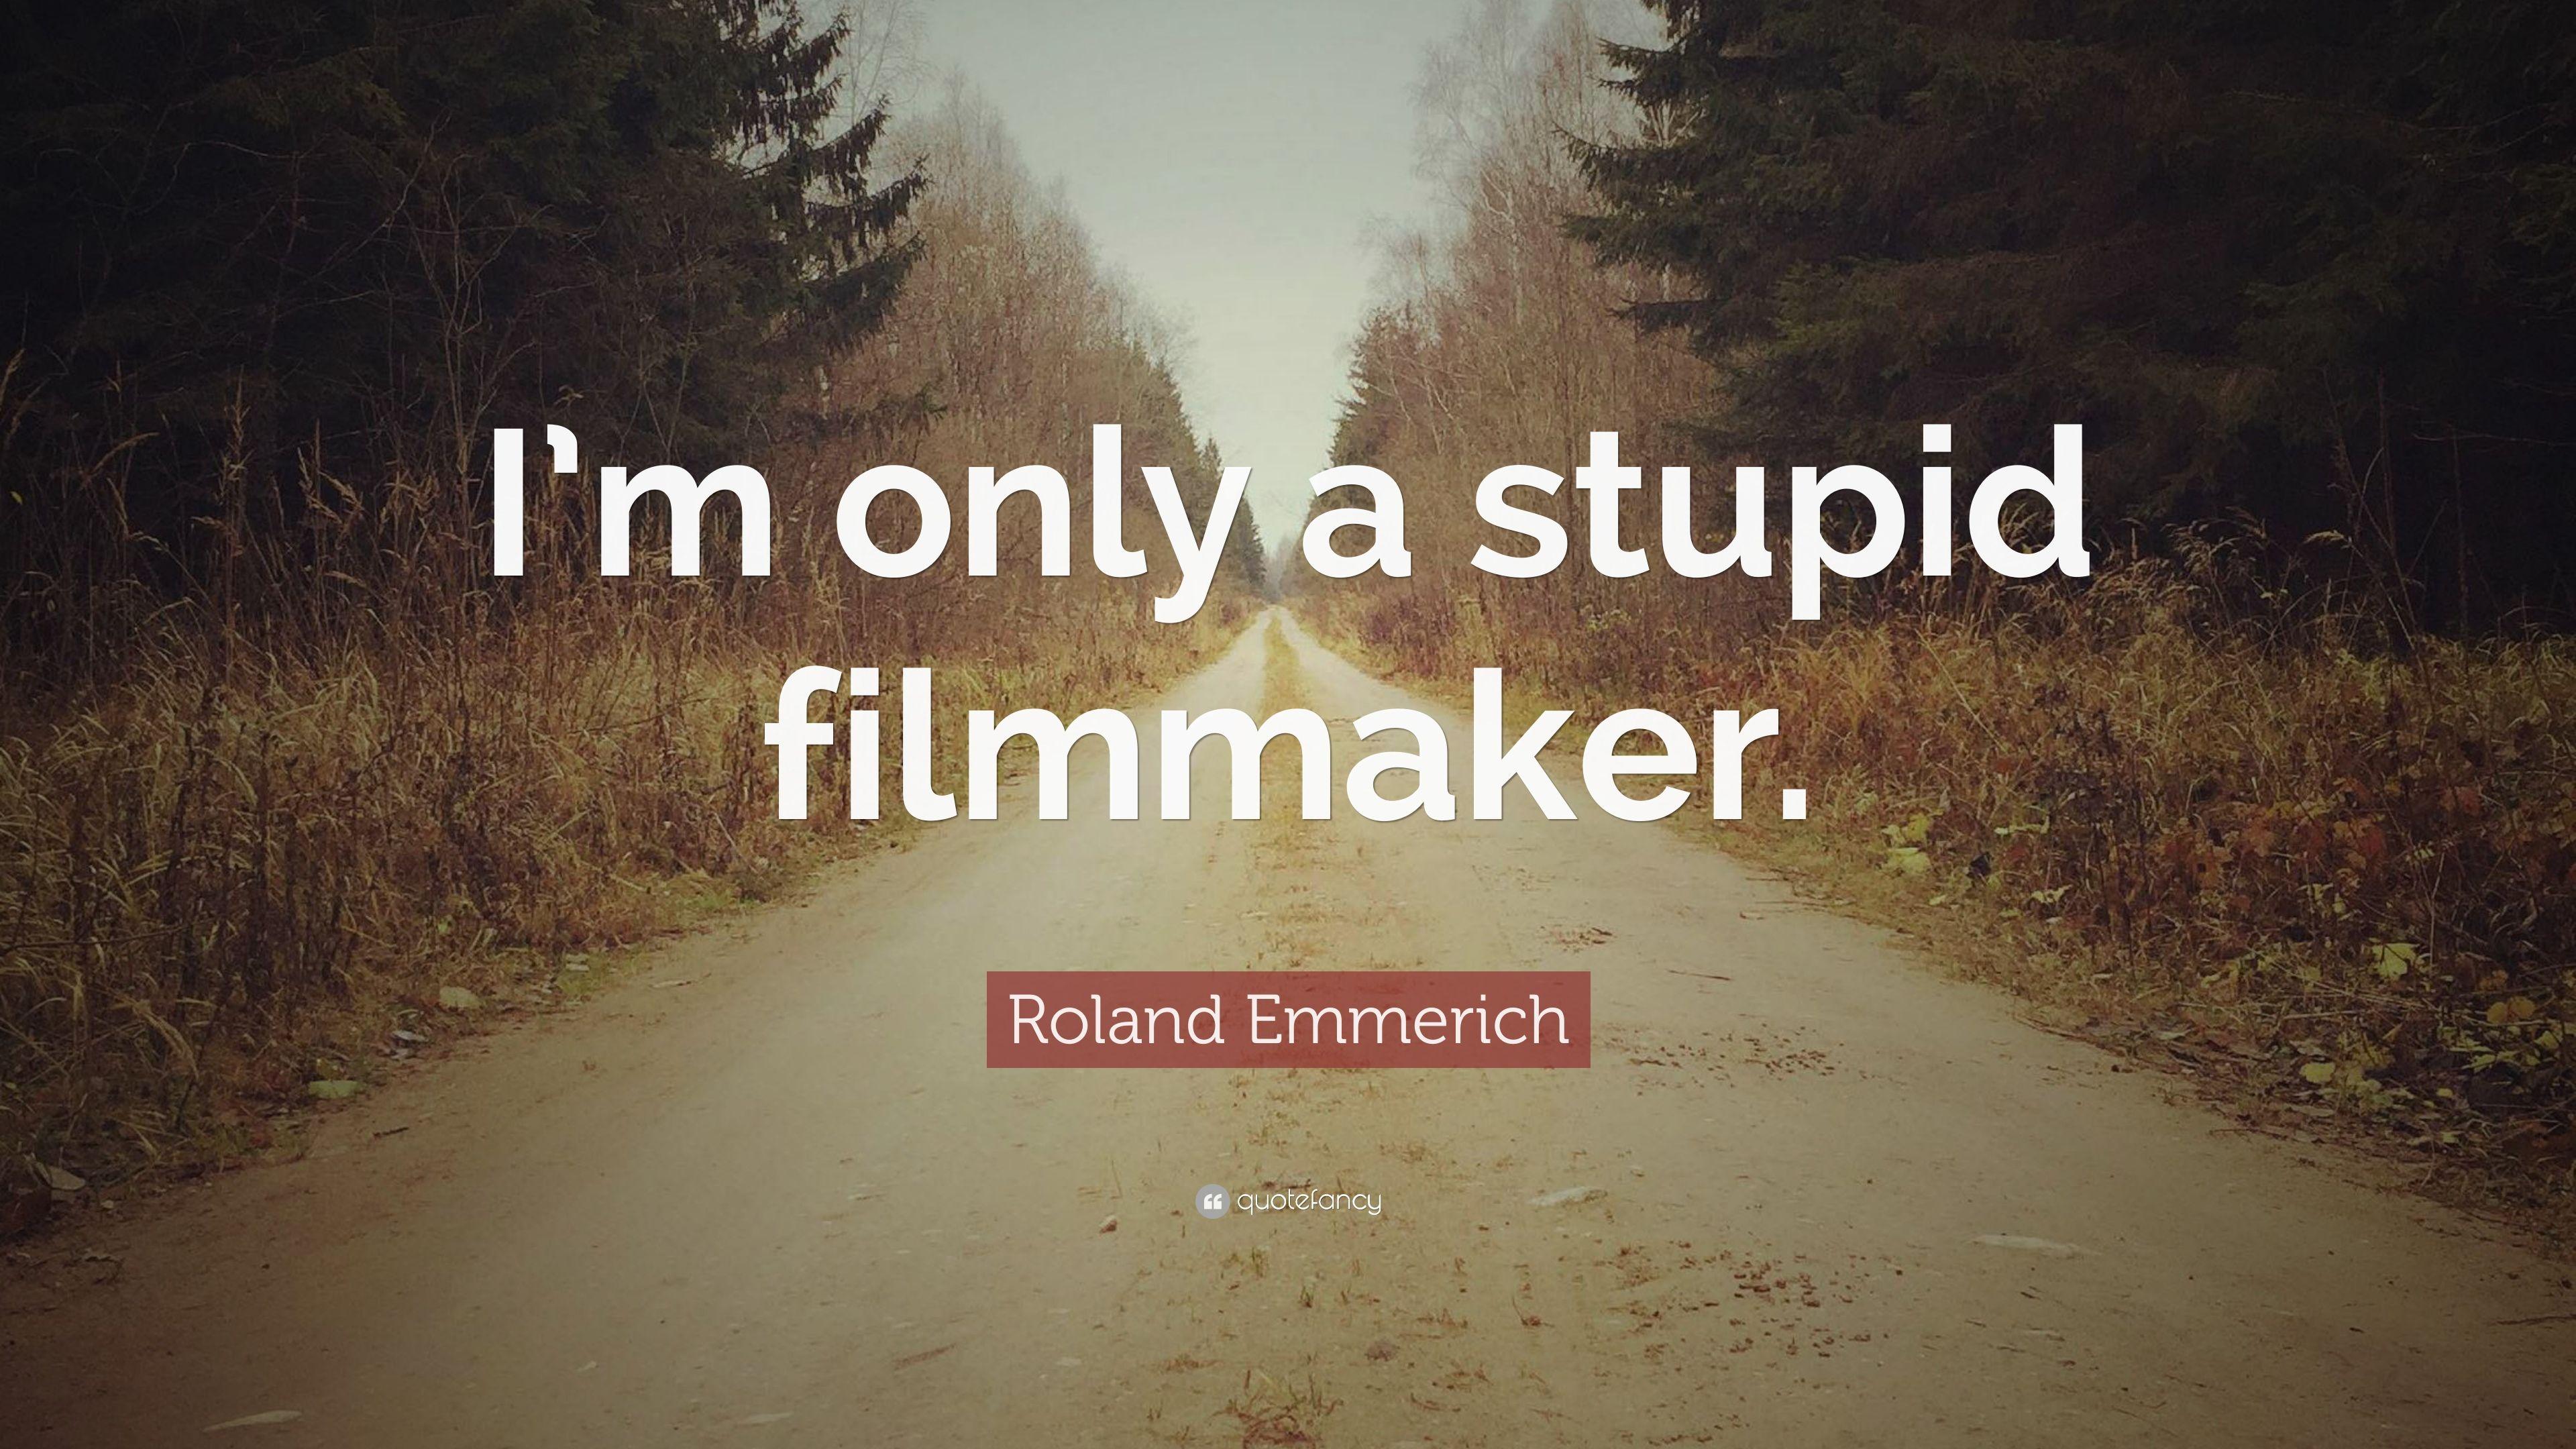 Roland Emmerich Quote: “I'm only a stupid filmmaker.” 10 wallpaper